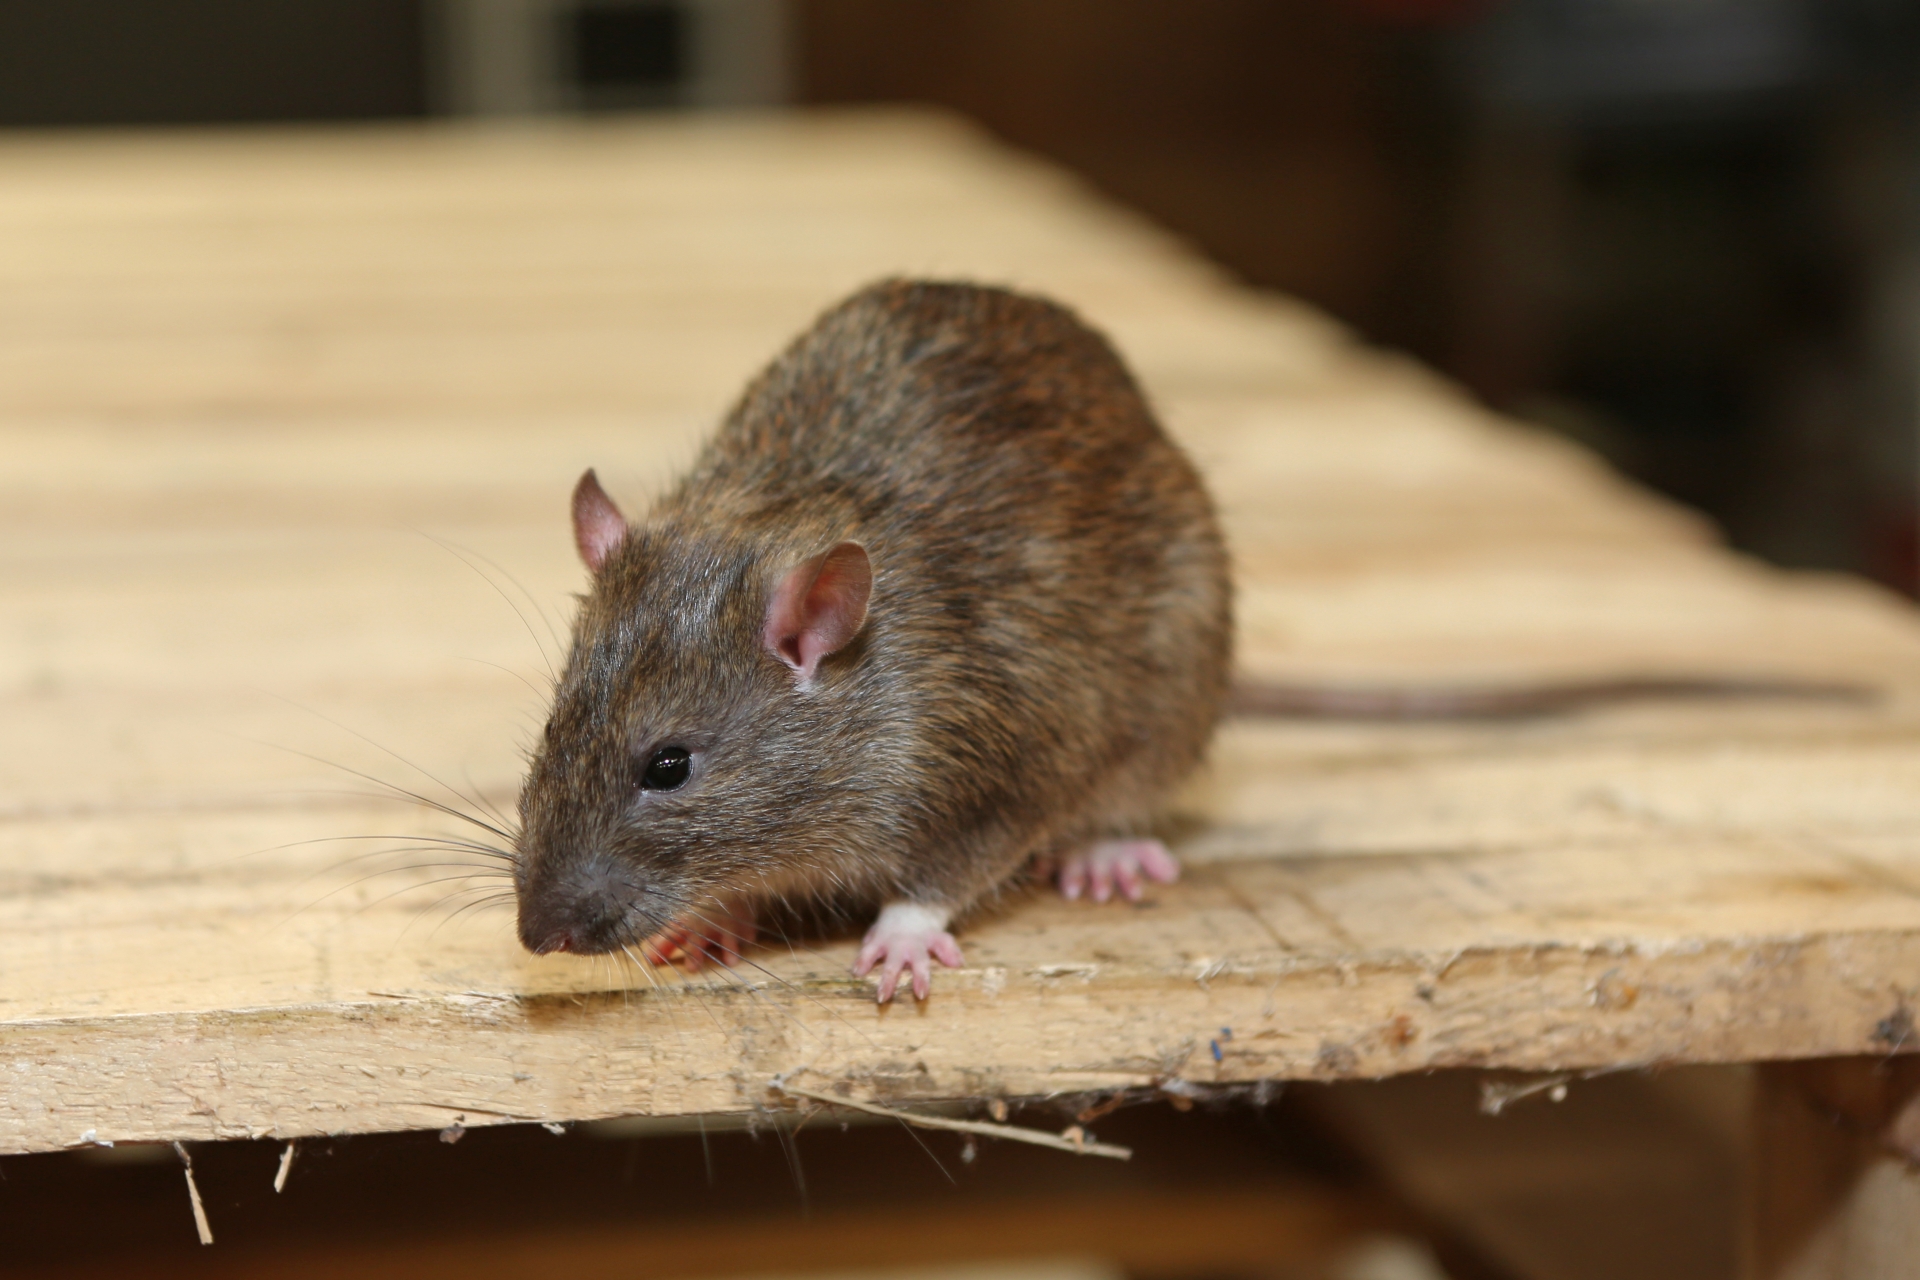 Rat Control, Pest Control in Streatham Hill, SW2. Call Now 020 8166 9746